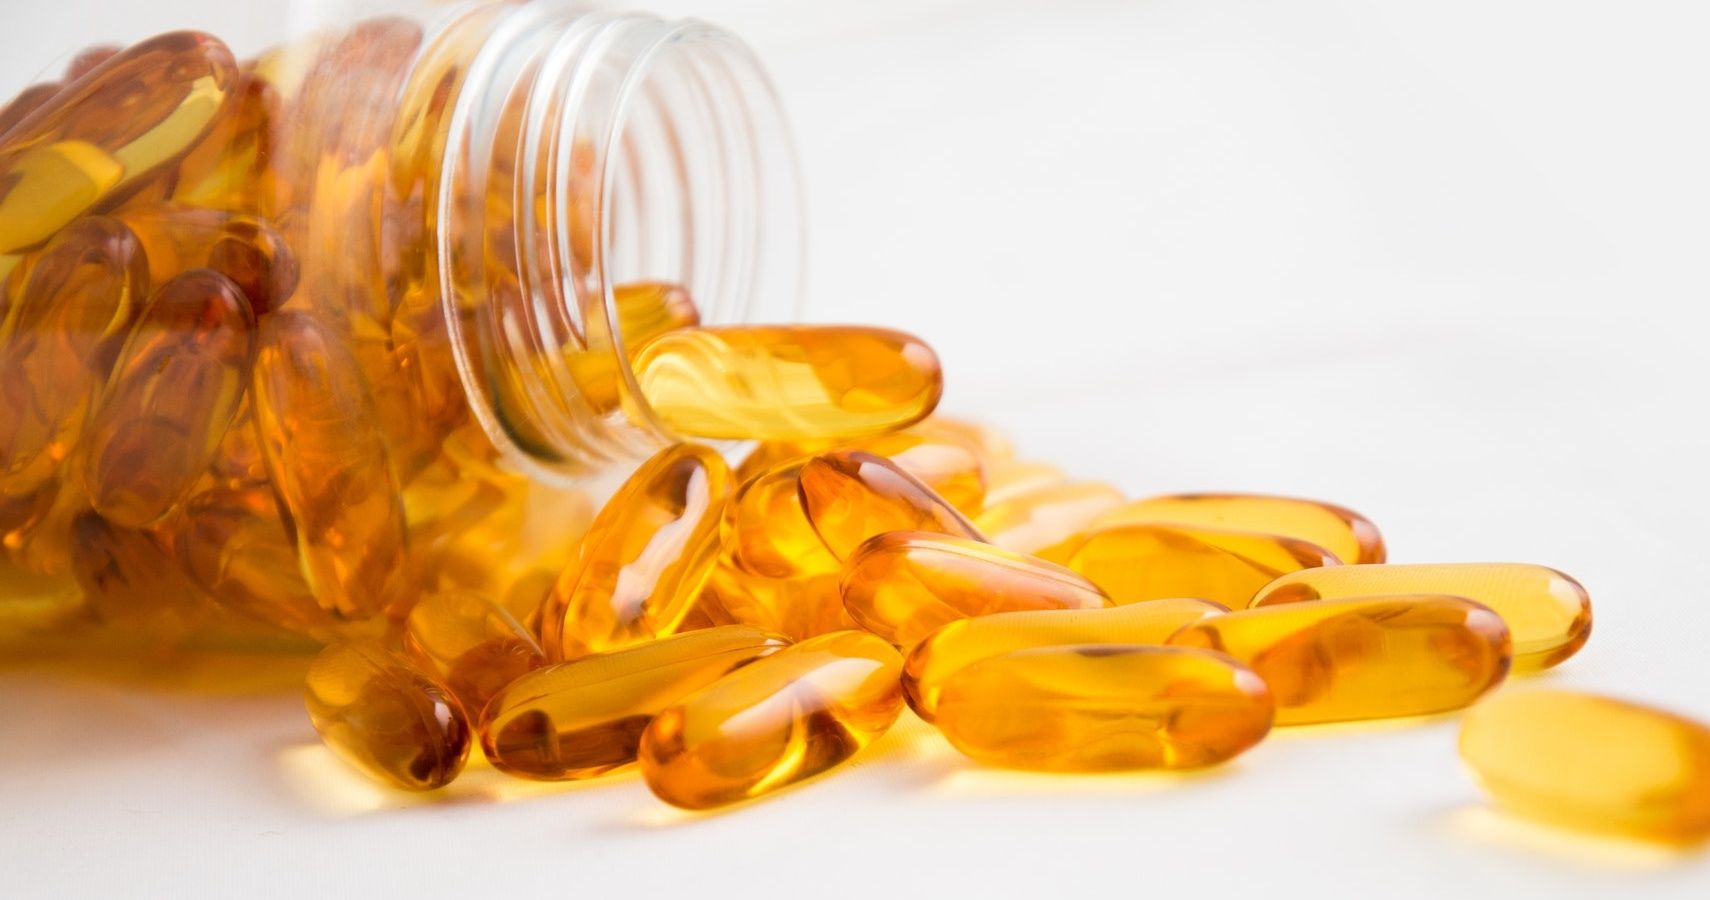 Fish Oil & Vitamin D During Pregnancy Can Reduce Risk Of Croup In Baby